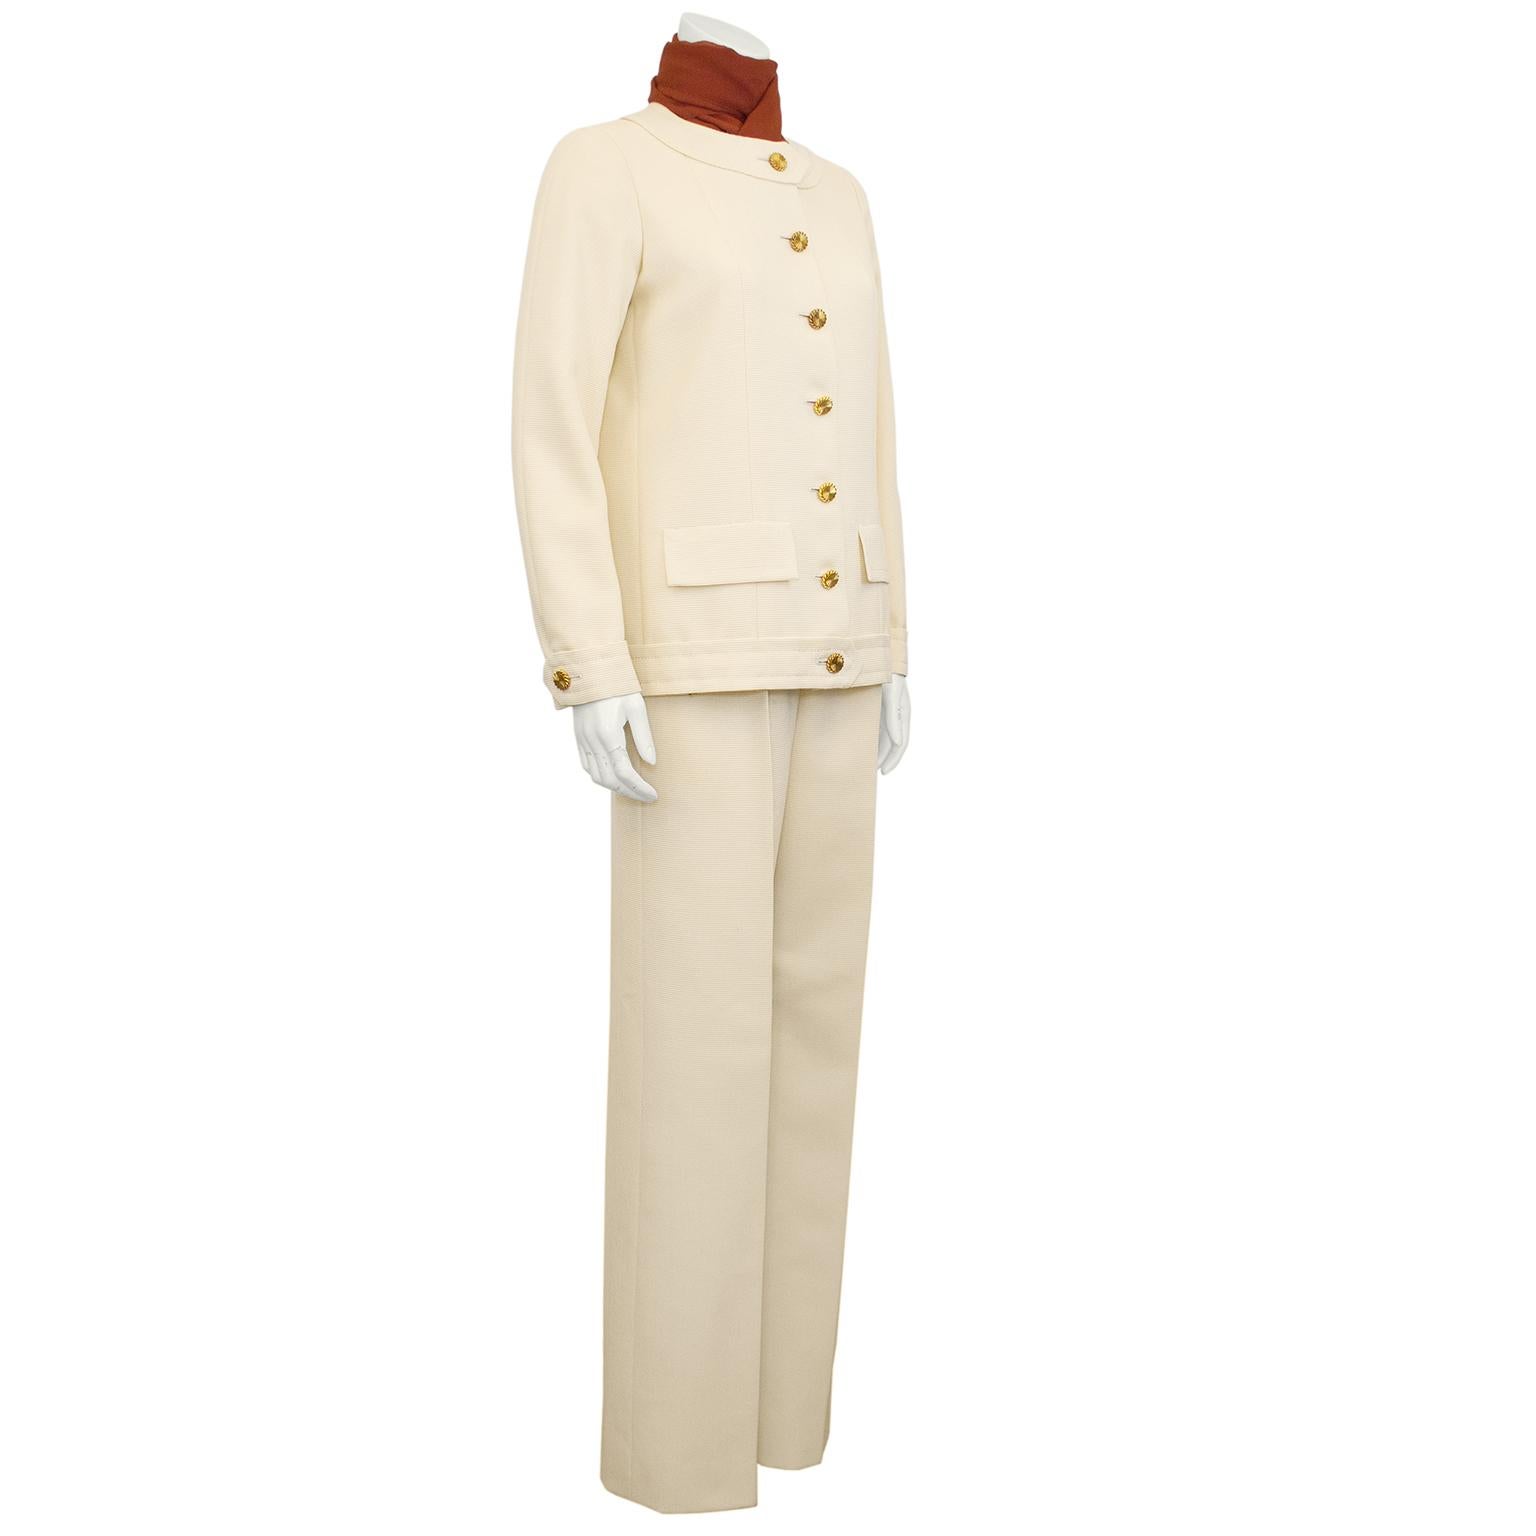 Incredible Chanel Haute Couture cream wool pantsuit from the early 1980s. Collarless jacket with faux flap pockets. Lovely round gold tone metal buttons with a twisted edge detail. Cream silk lining with the iconic Chanel interior hem chain. High